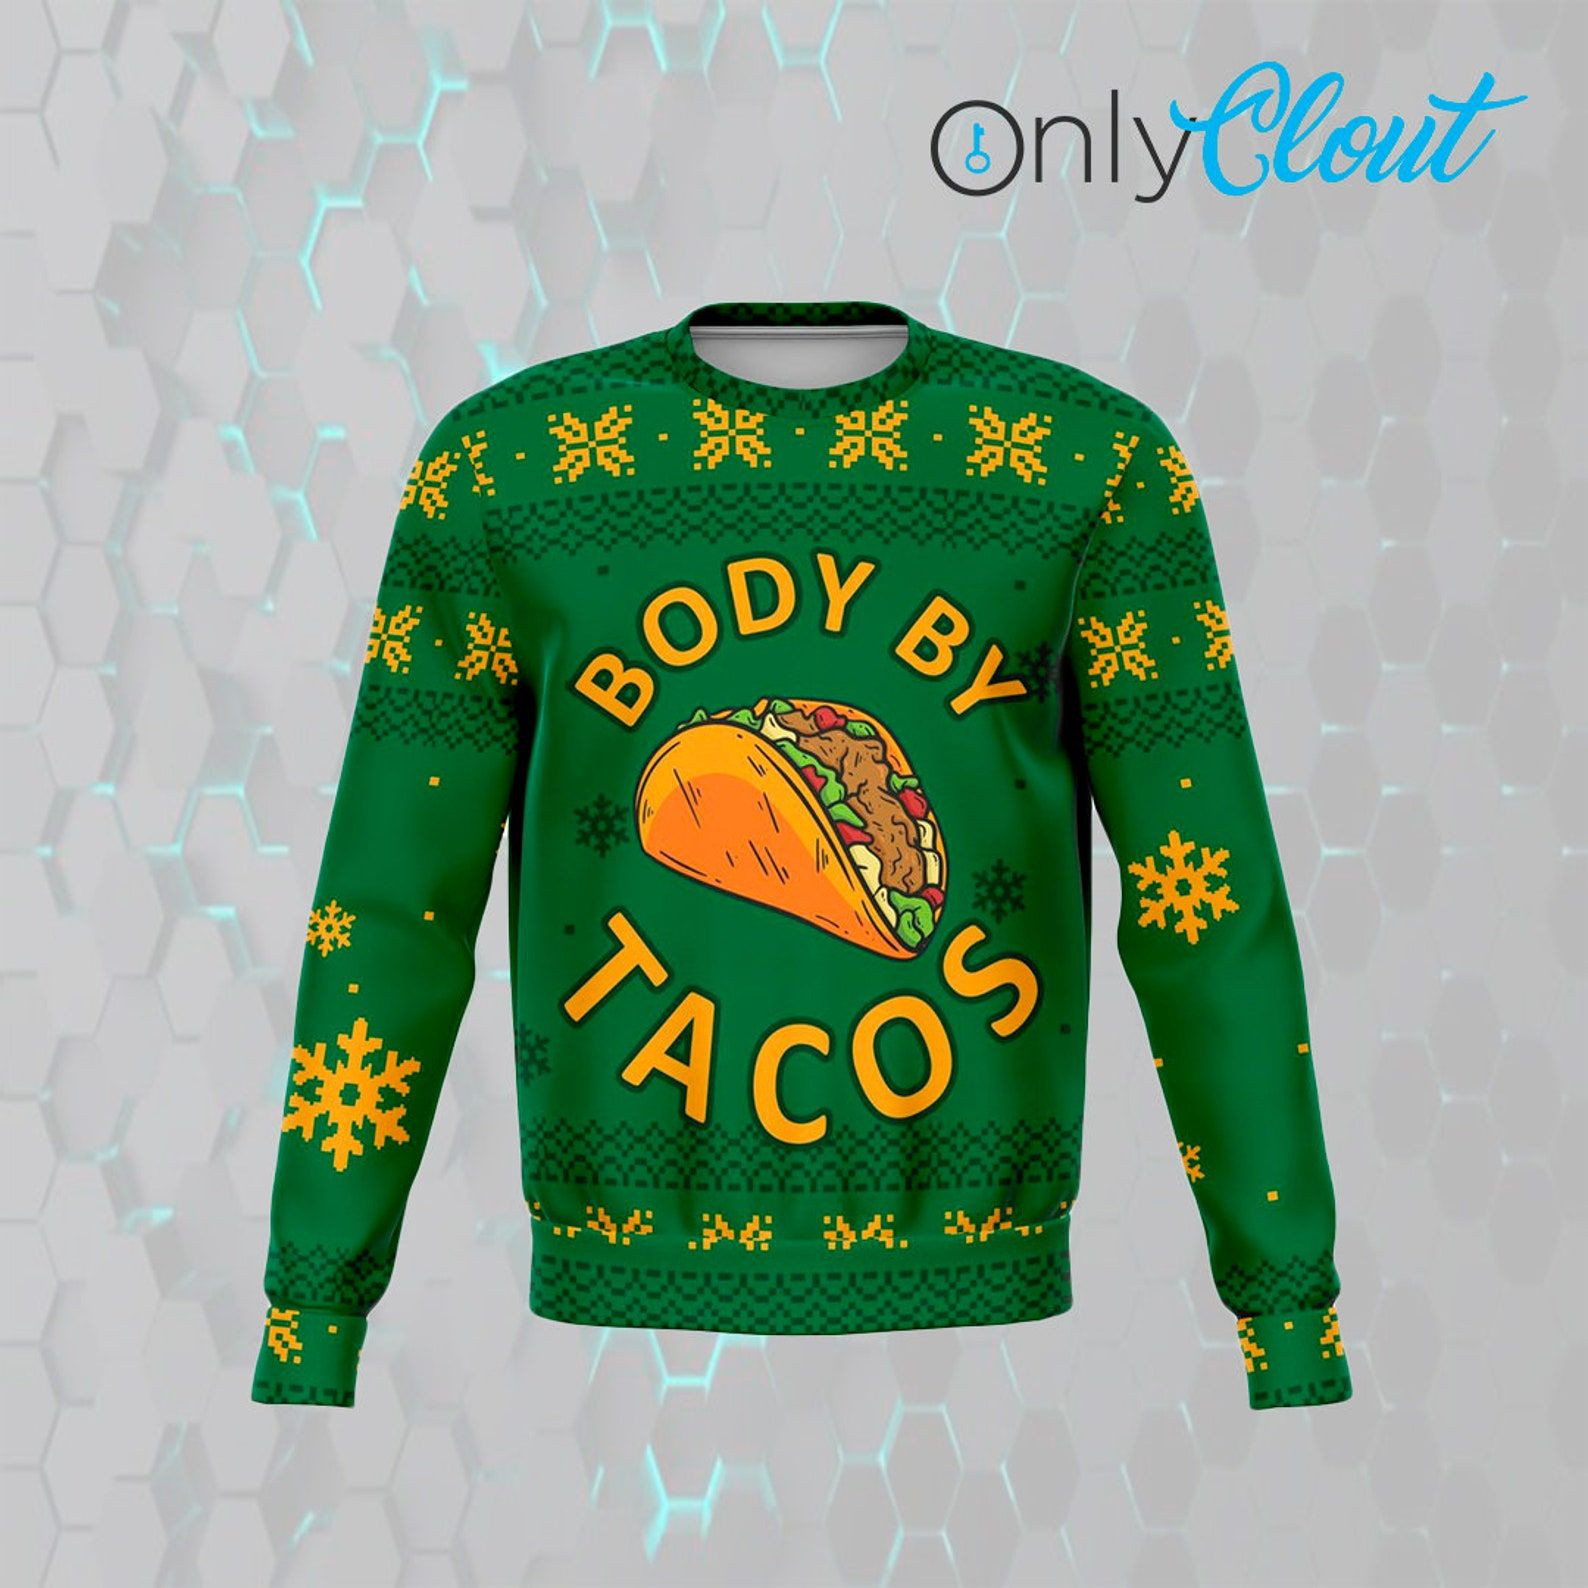 Body By Tacos Funny Ugly Christmas Sweater Ugly Sweater Christmas